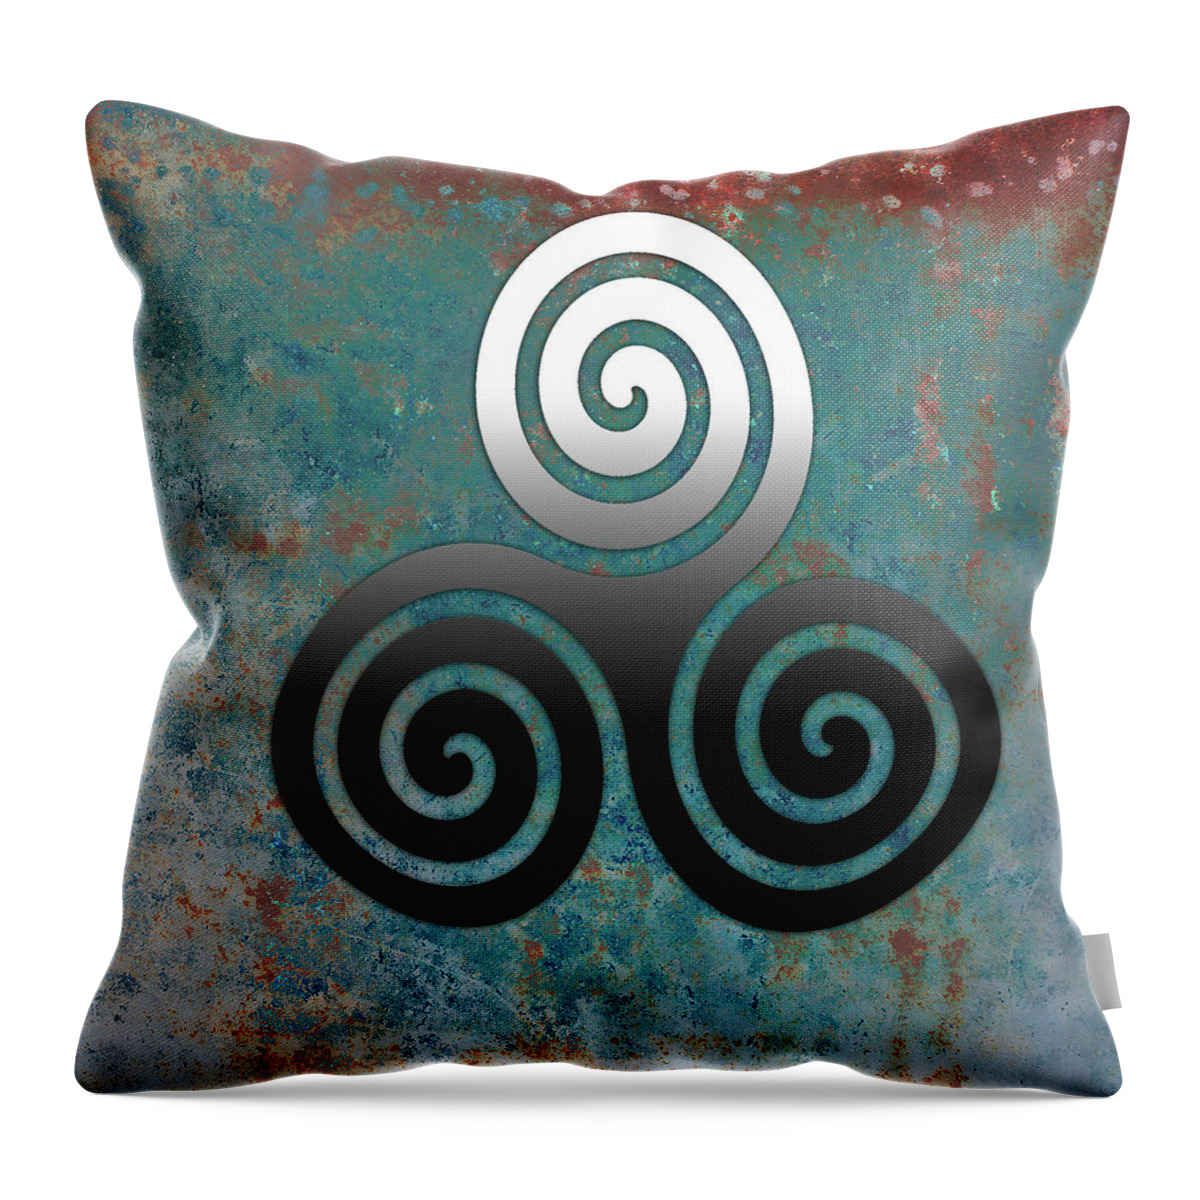 Hammered Metal Triple Spiral Throw Pillow featuring the digital art Hammered Metal Triple Spiral Celtic Symbol by Kandy Hurley